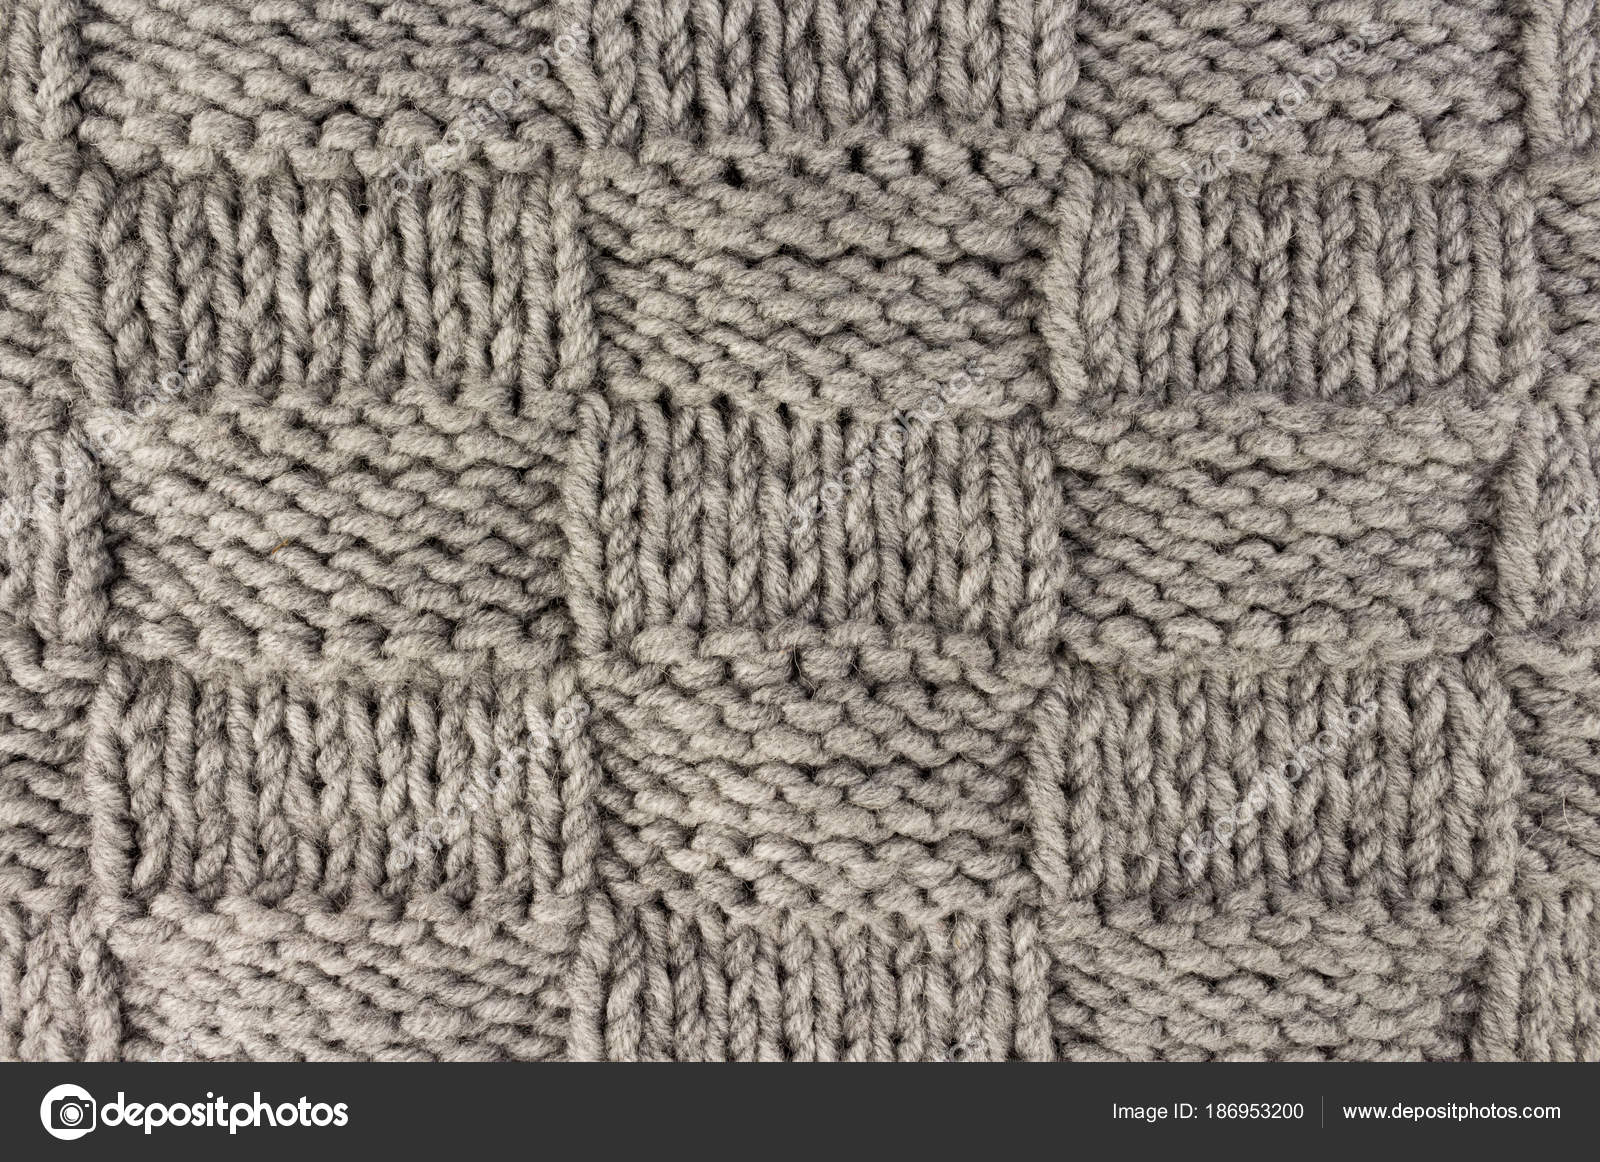 Knitted Pattern Knitting Gray Knit Fabric Texture Background Or Knitted Pattern